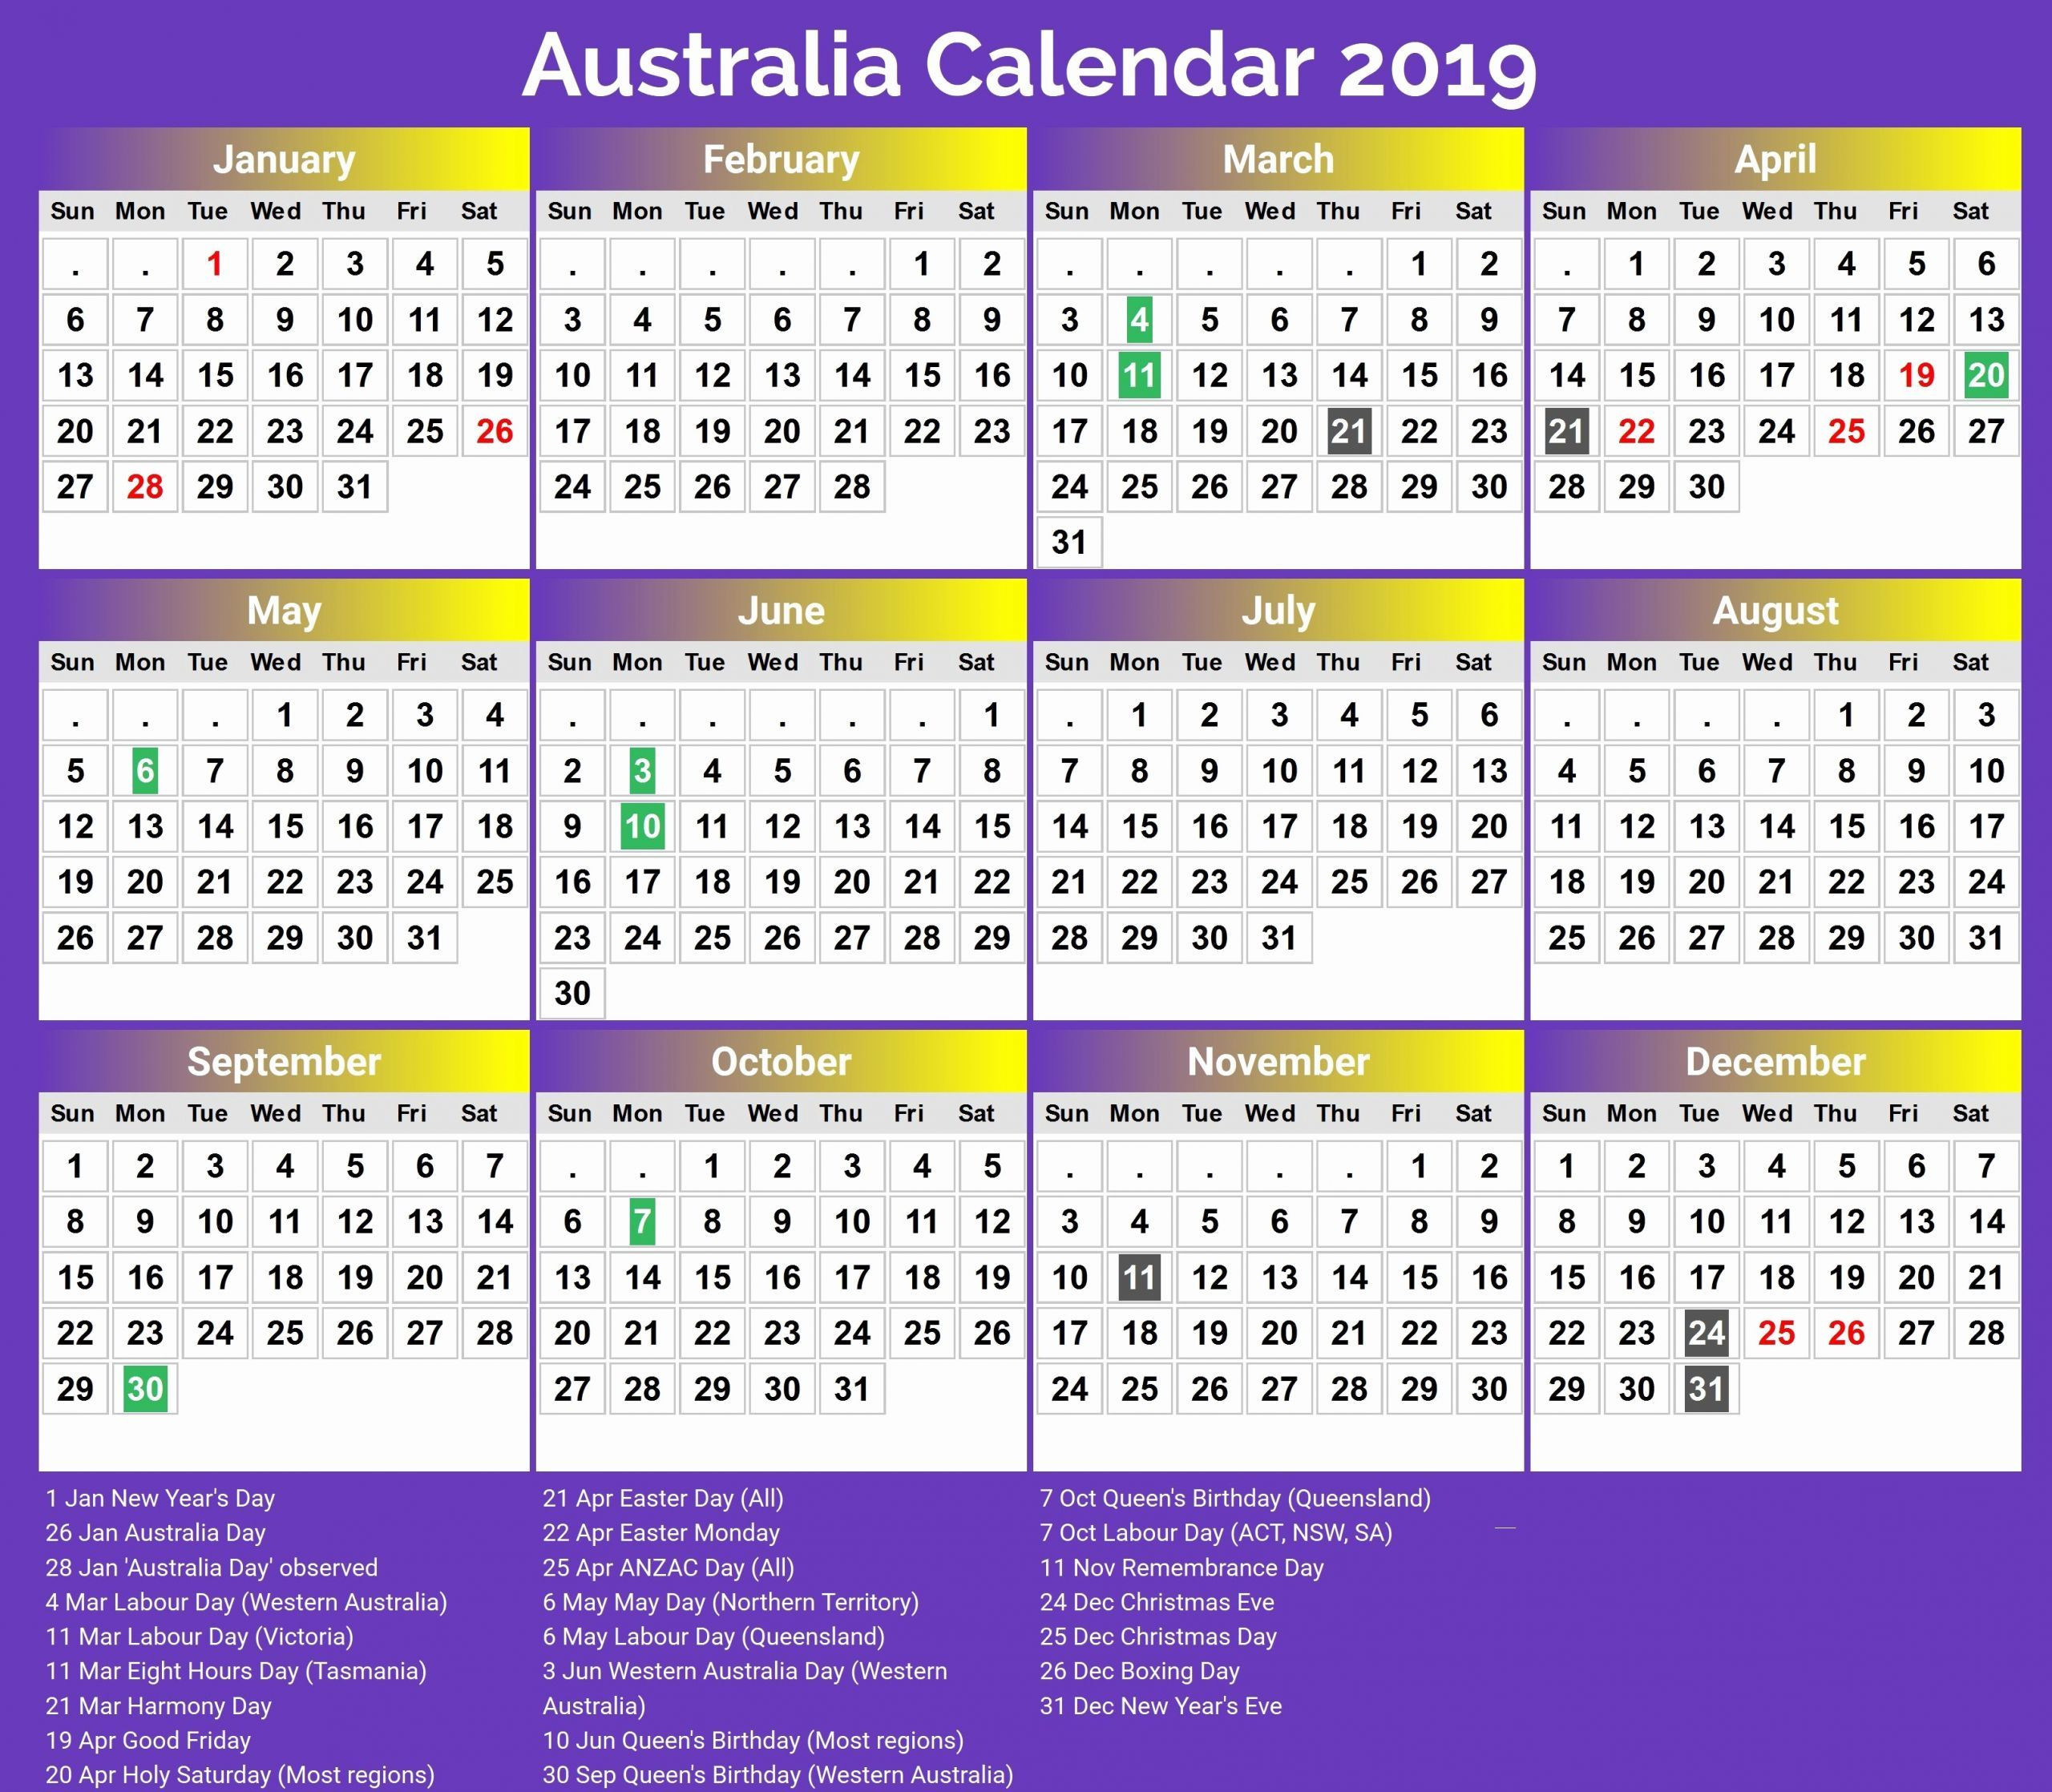 2021 Easter Dates Qld - Th2021-Google Calender 2021 With Public Holidays Qld